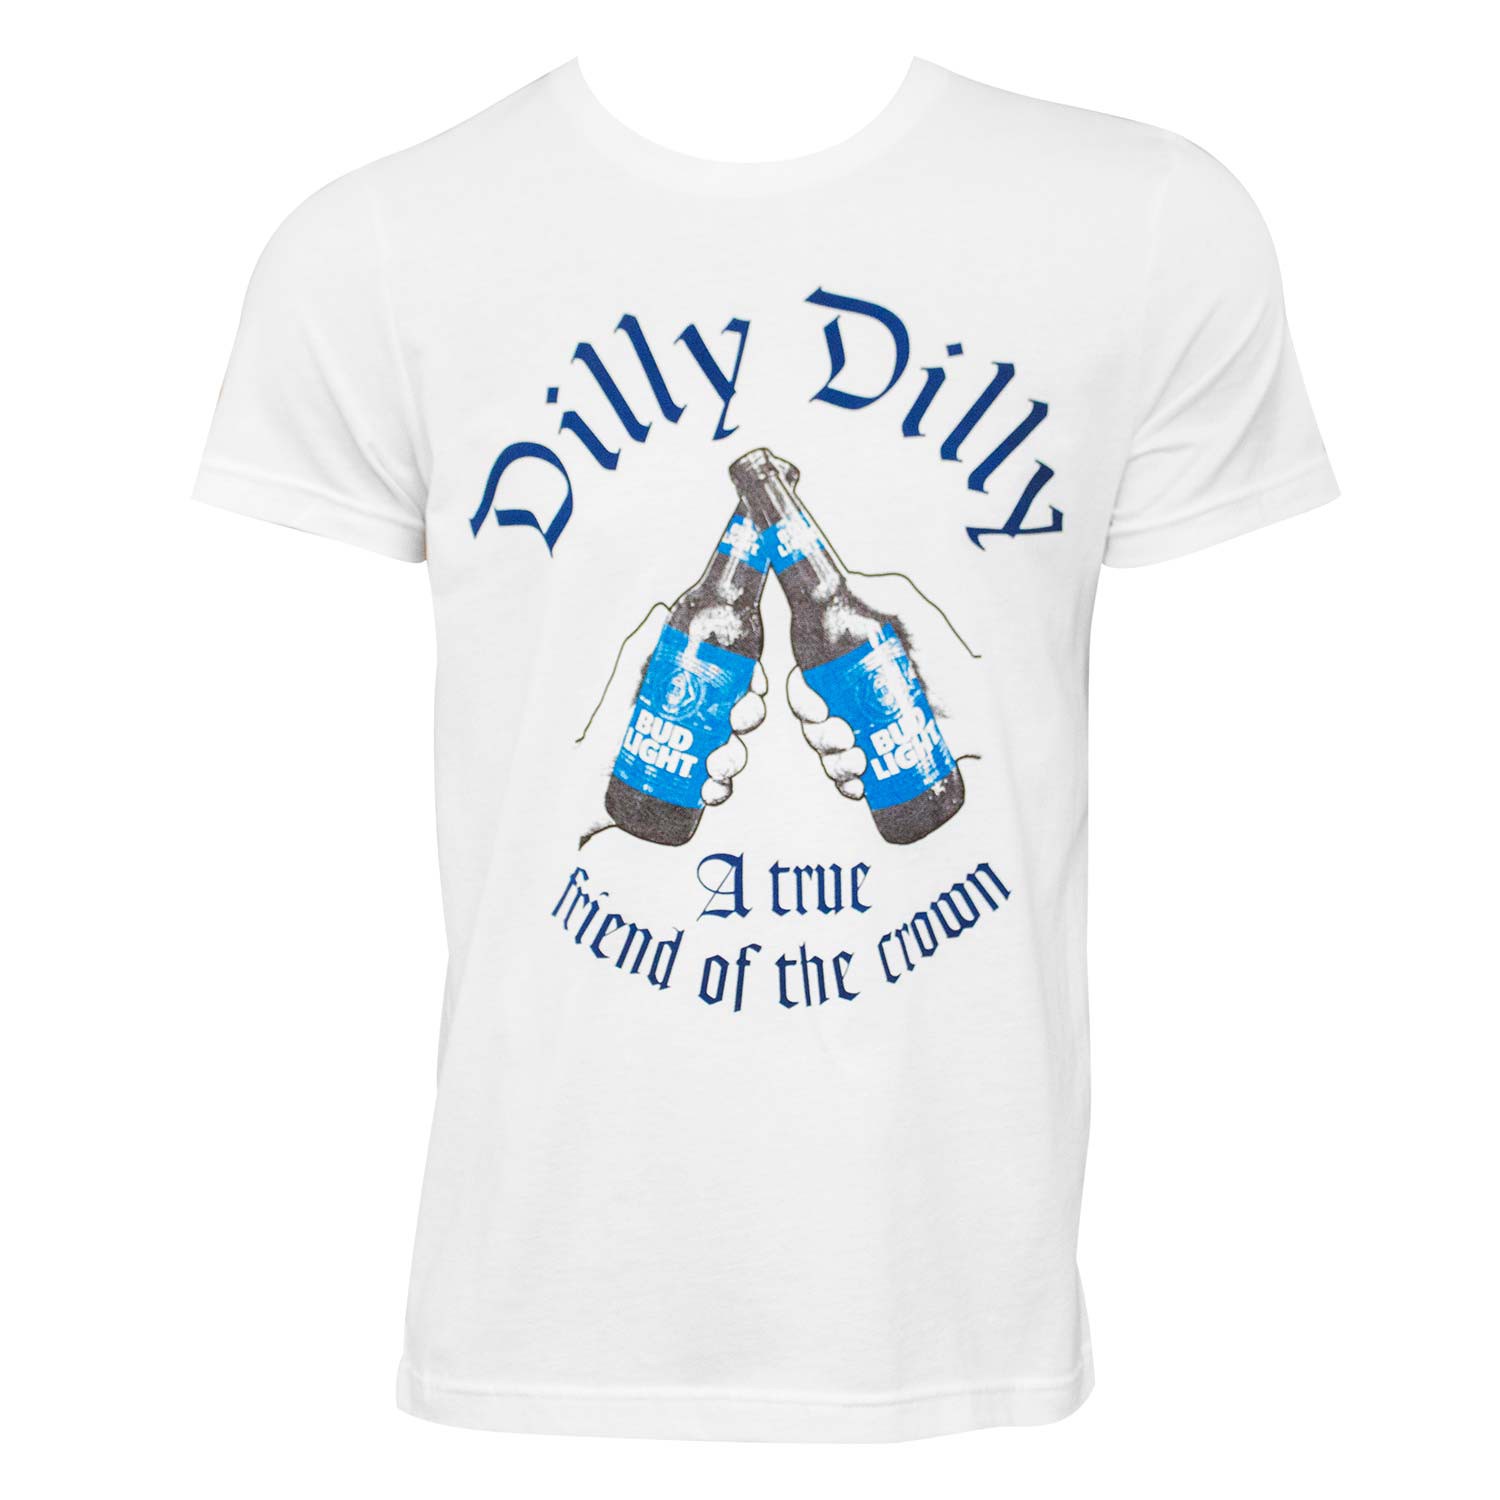 Bud Light Dilly Dilly Friend Of The Crown White Tee Shirt